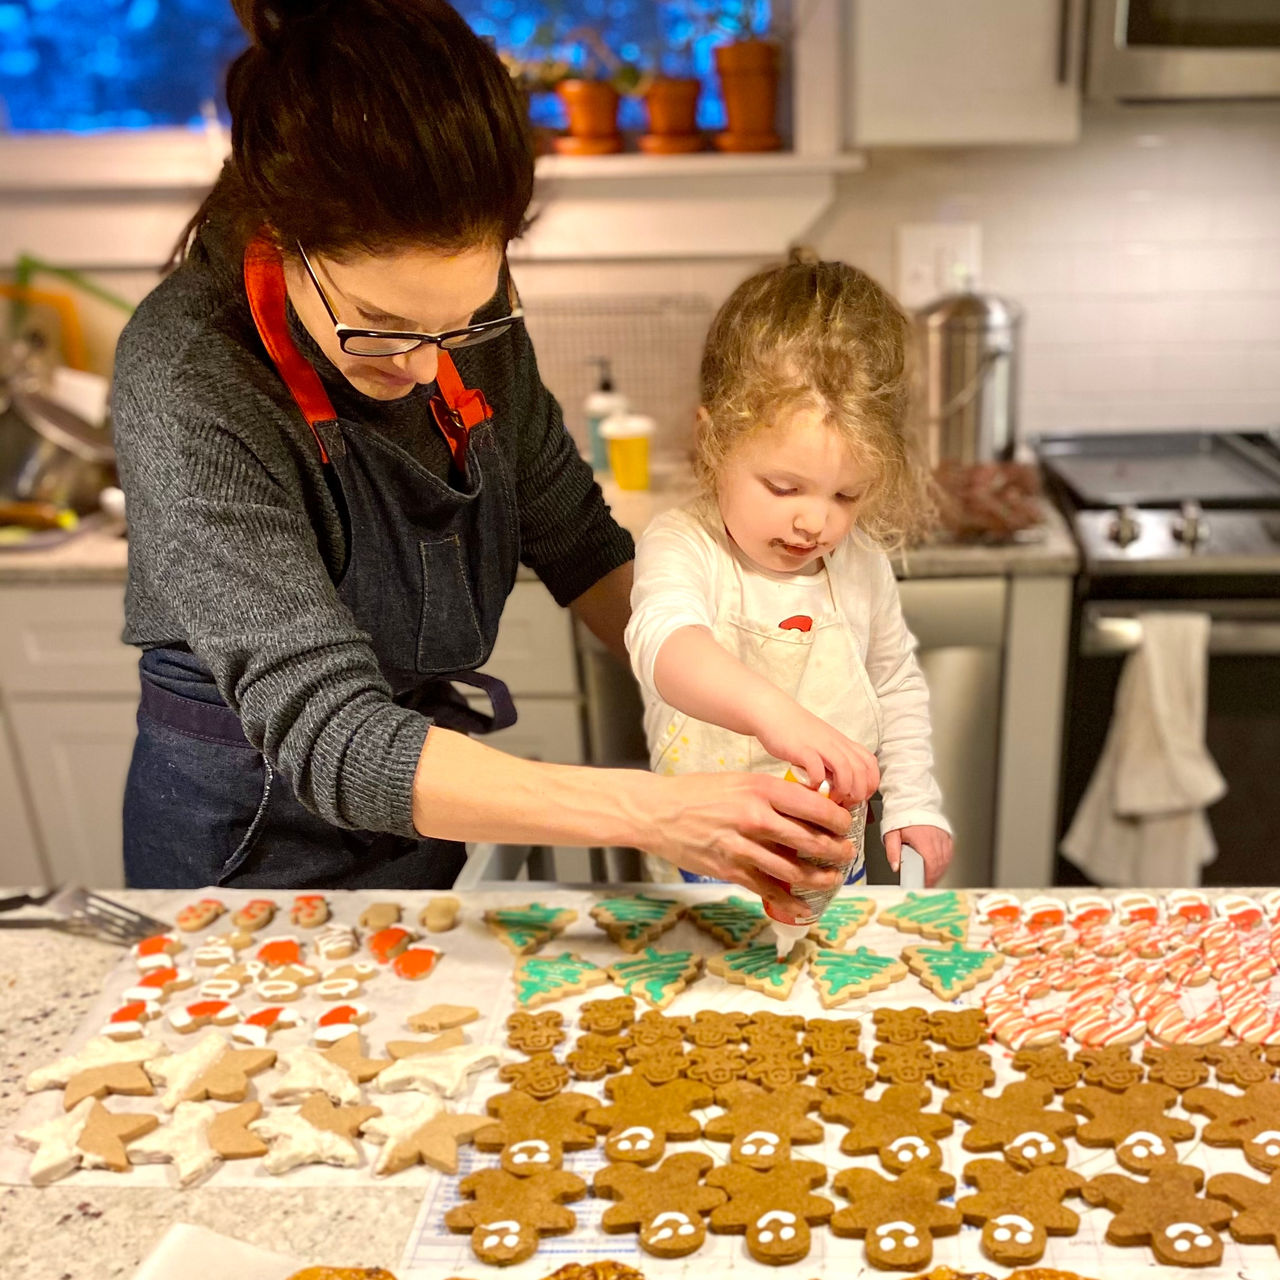 a mother and daughter in the kitchen decorating holiday cookies with icing